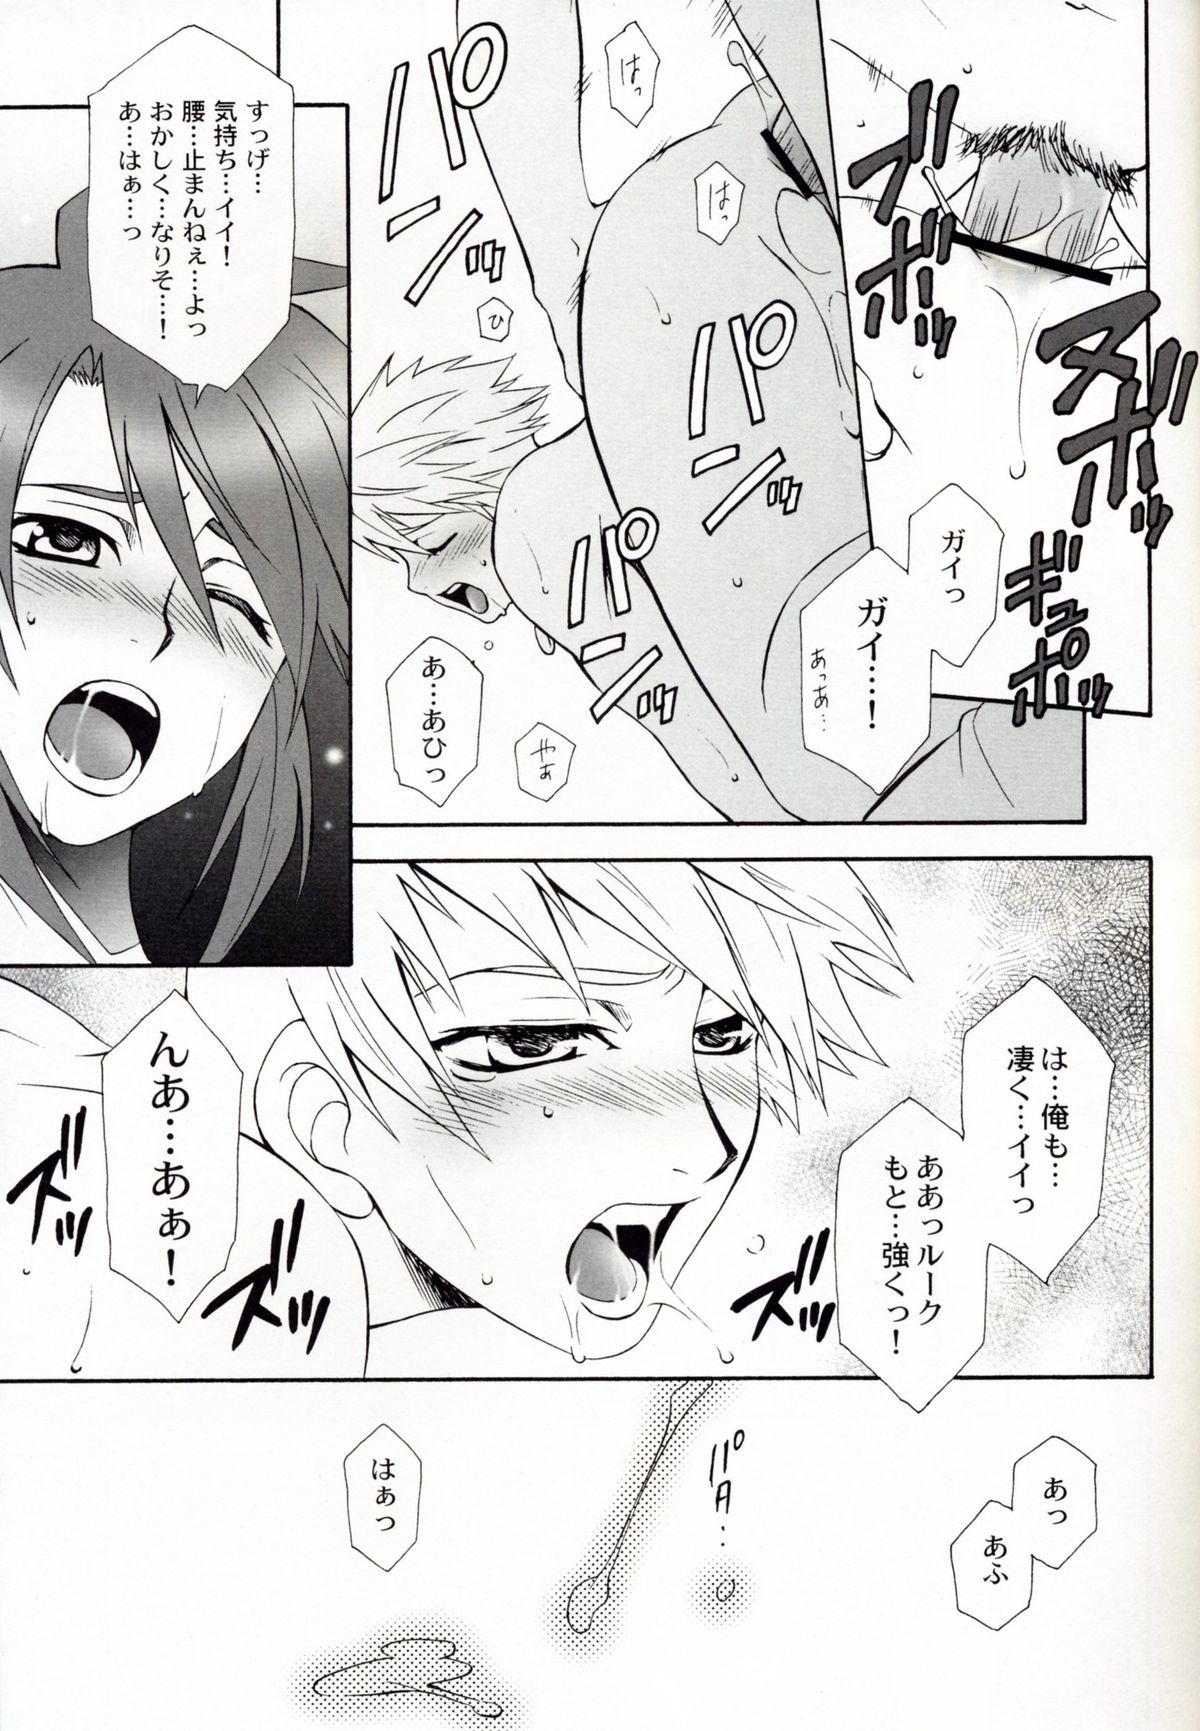 Cheerleader Mujaki na Messiah - Tales of the abyss Roundass - Page 8